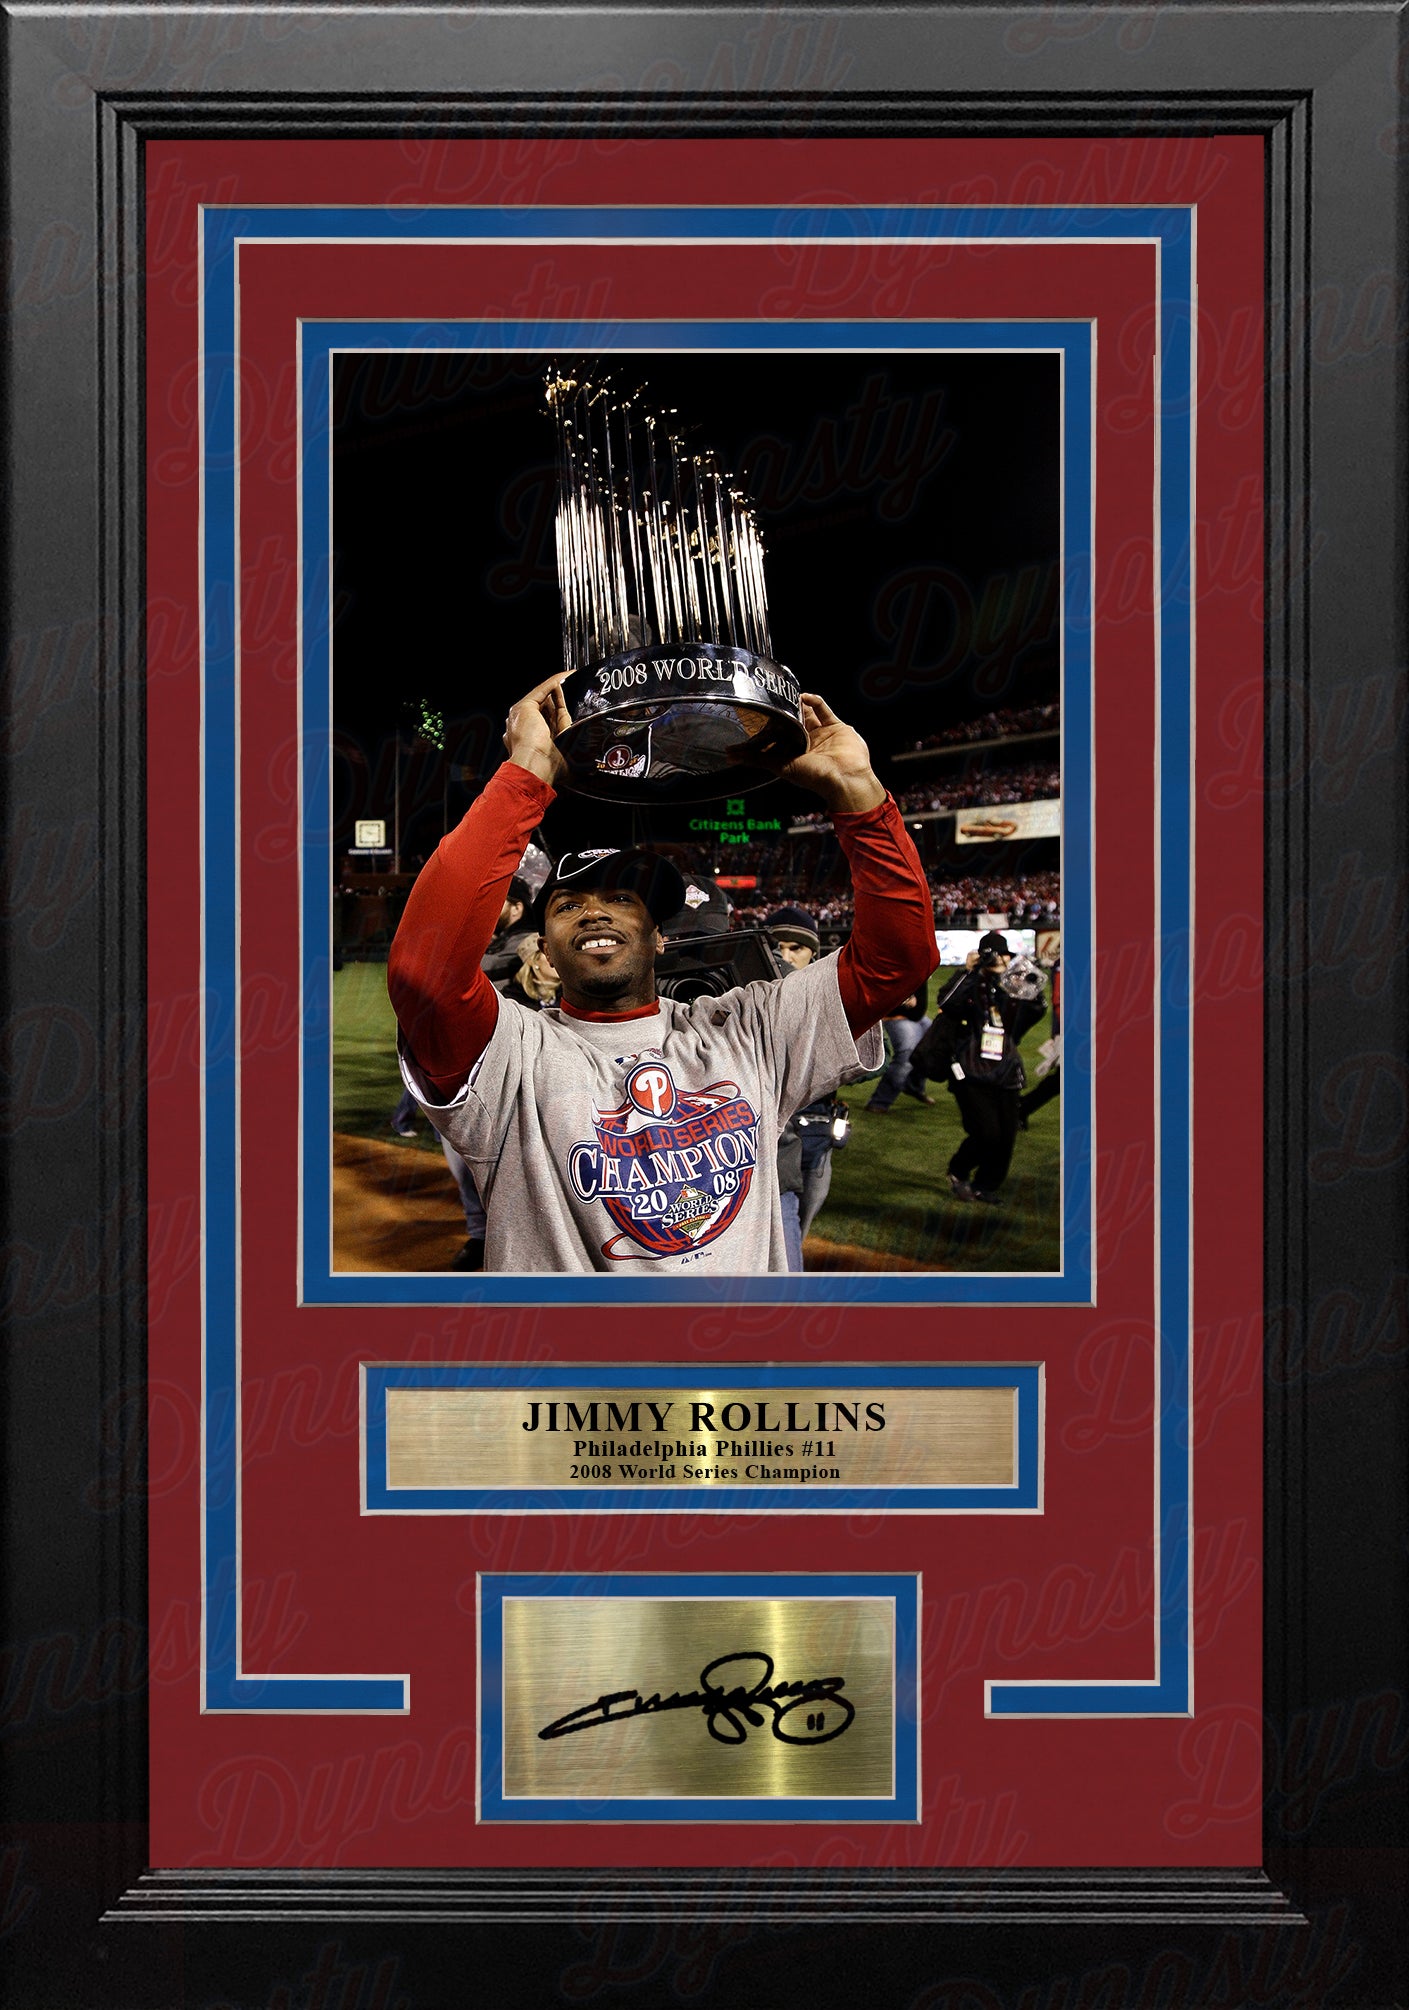 Jimmy Rollins 2008 World Series Trophy Philadelphia Phillies Framed Photo  with Engraved Autograph